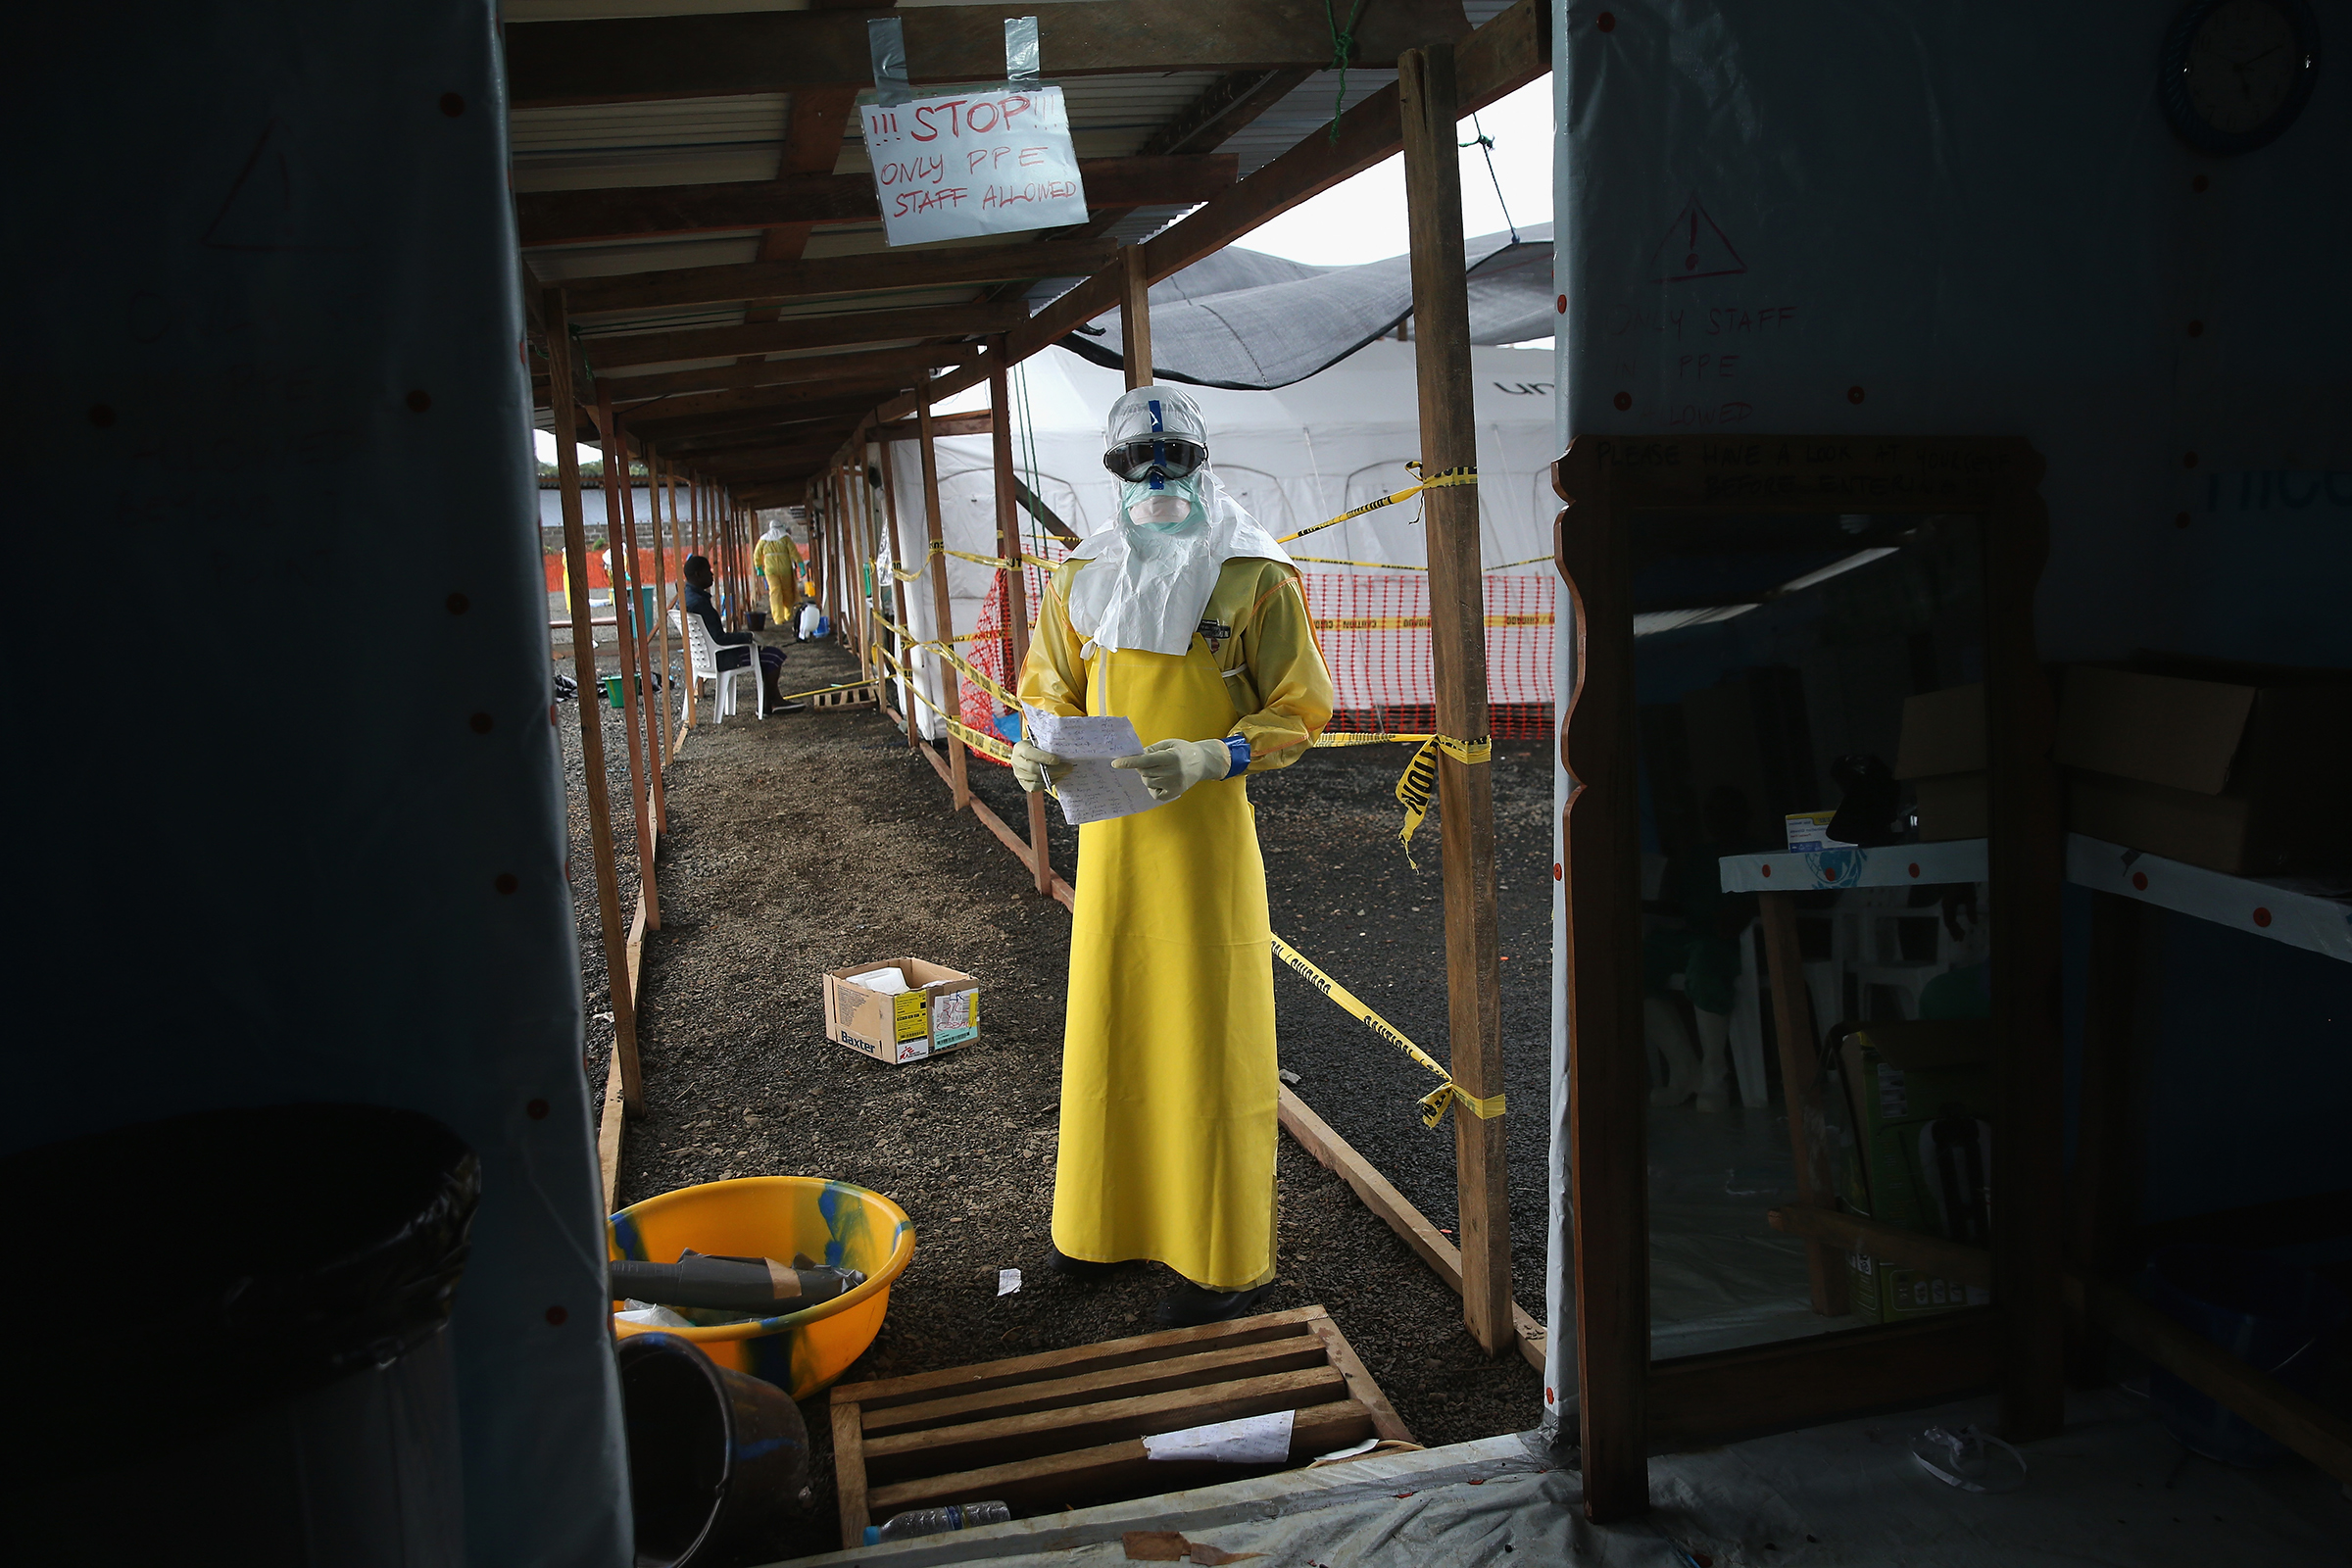 A staffer for Doctors Without Borders (MSF) stands in protective clothing in the new MSF Ebola treatment center on August 21, 2014 near Monrovia, Liberia. (John Moore—Getty Images)